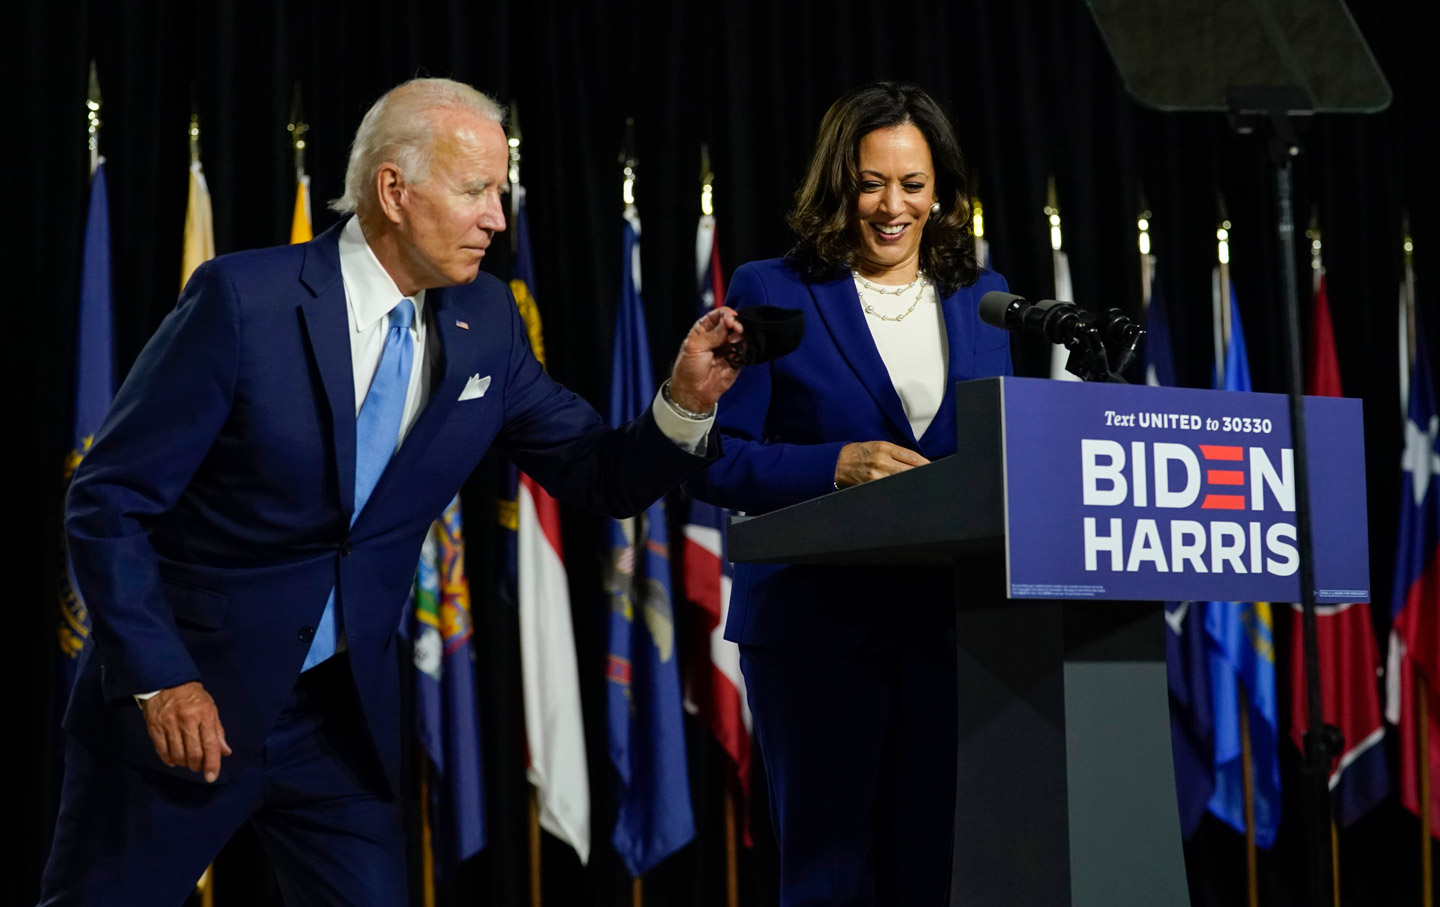 Biden will bring to the presidency decades of foreign policy experience and a demonstrated commitment to Africa, says the Biden-Harris agenda for Africa